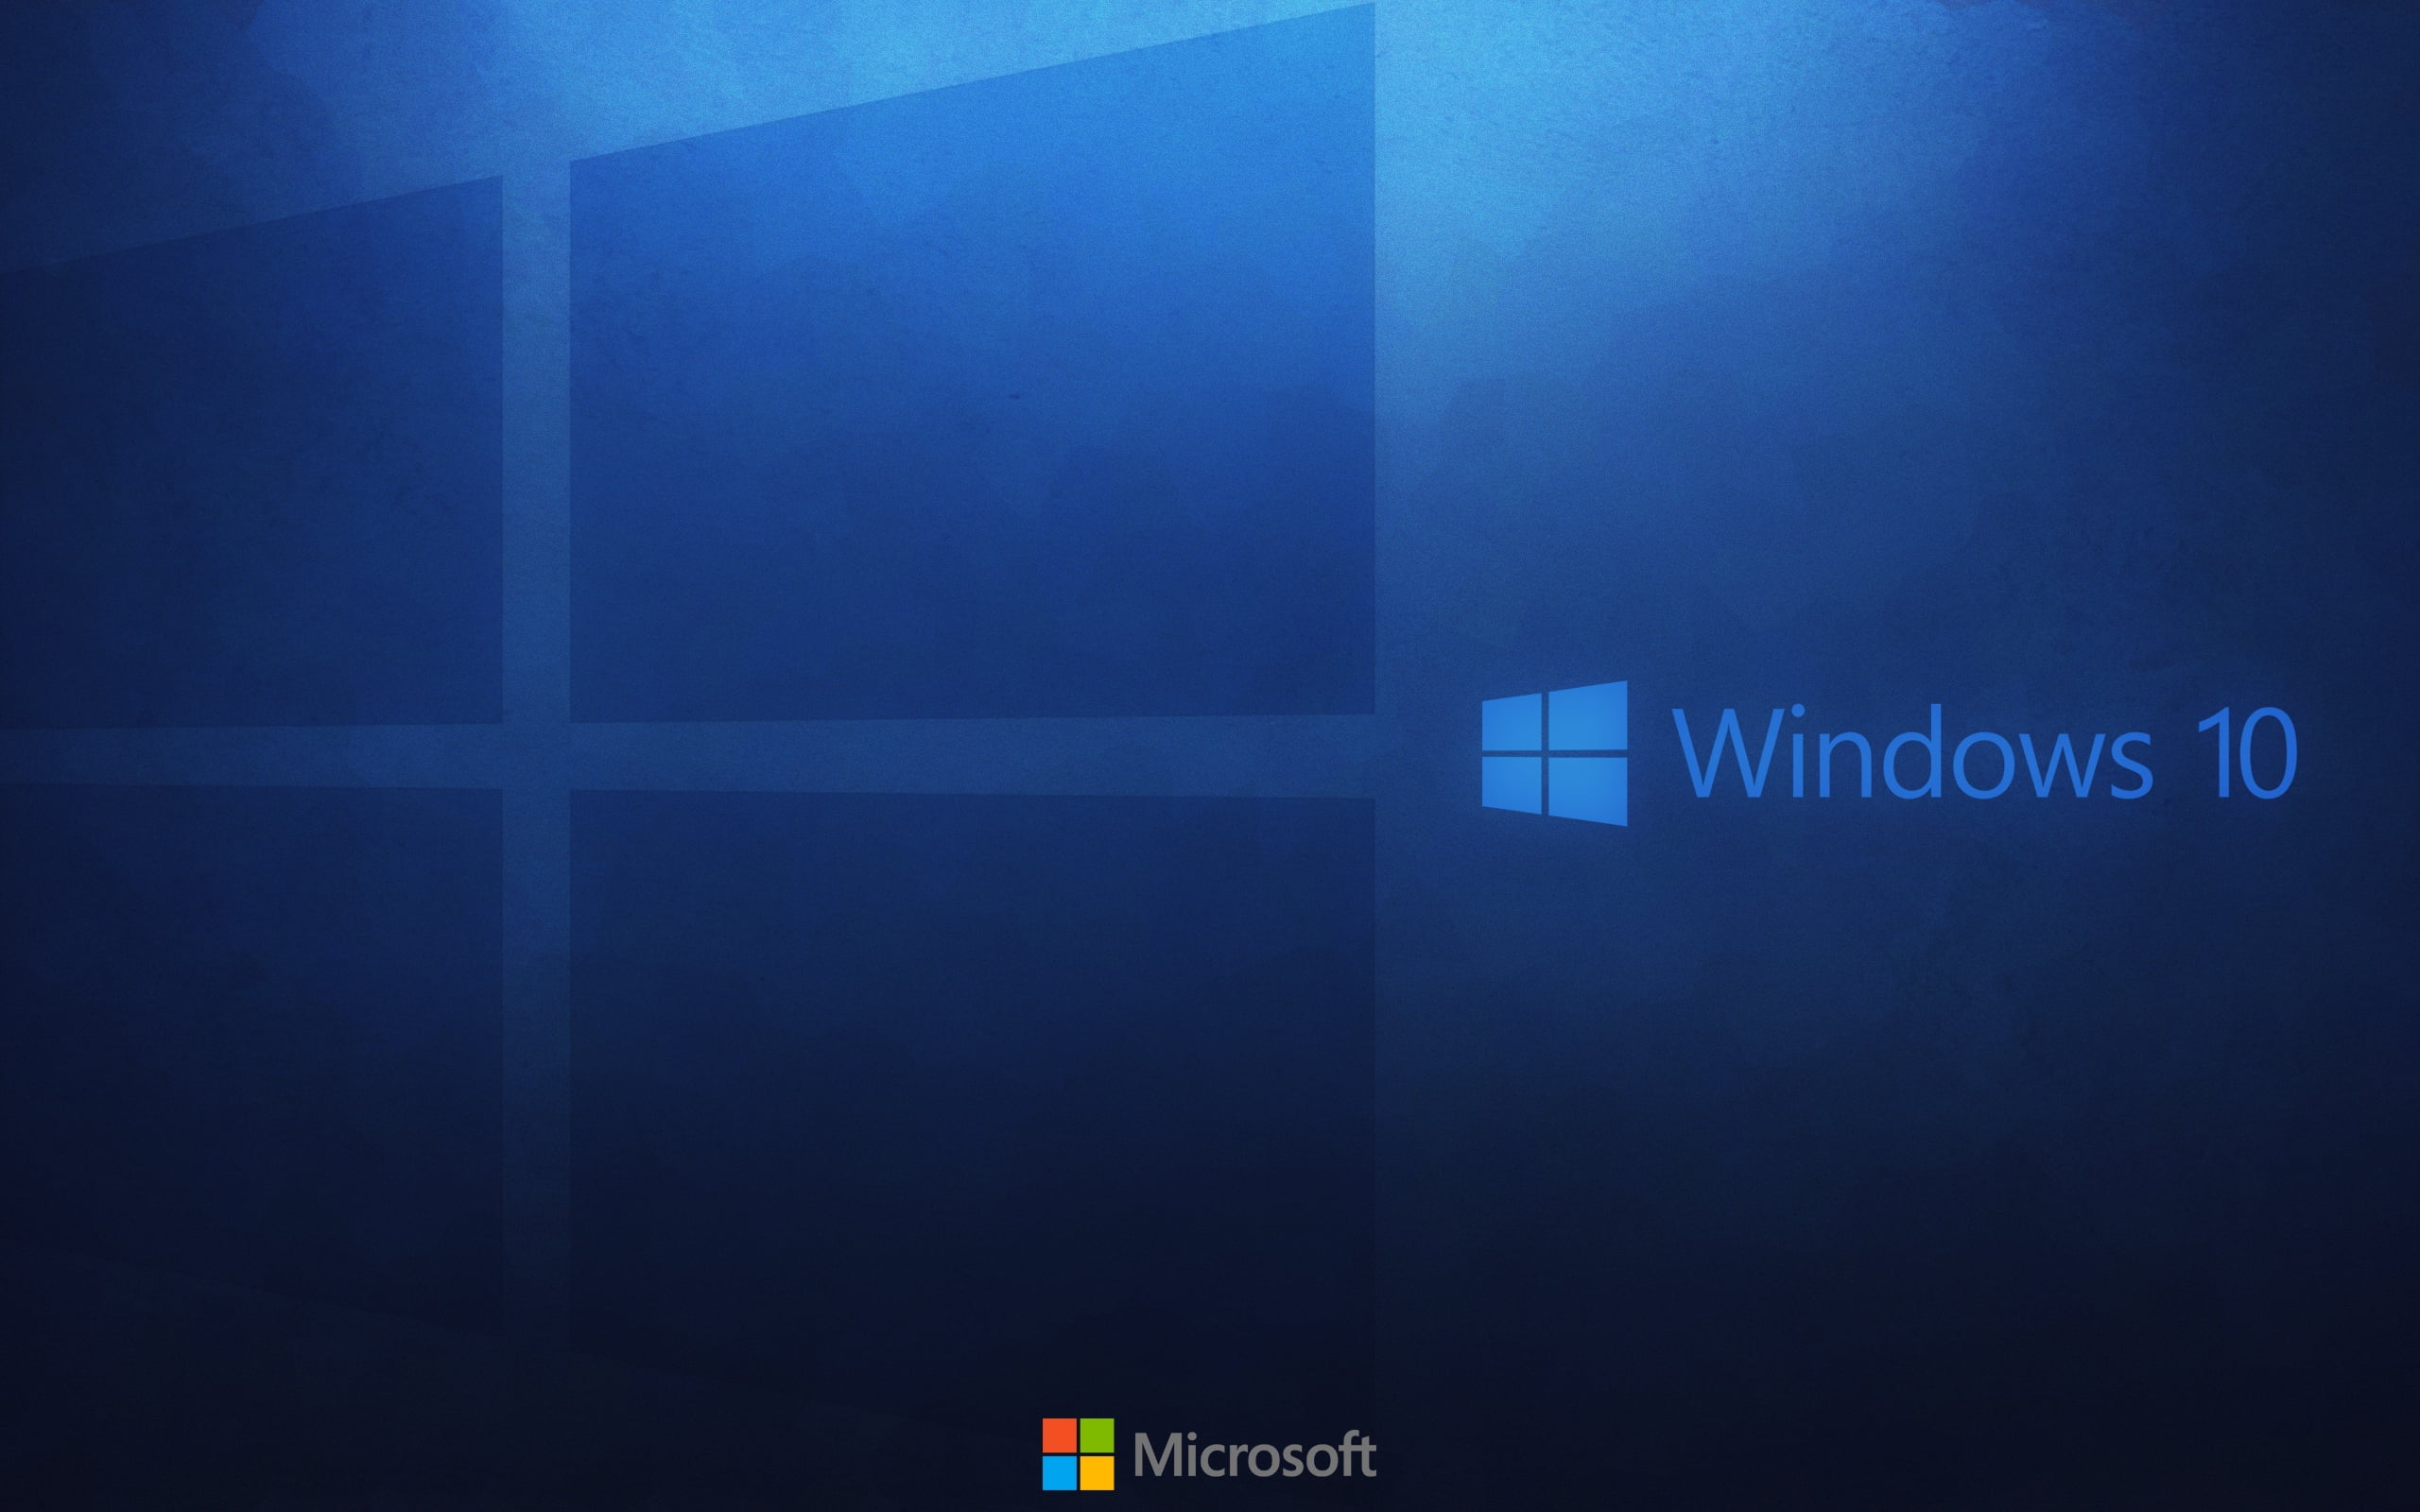 Microsoft Windows 10 operating system, backgrounds, abstract